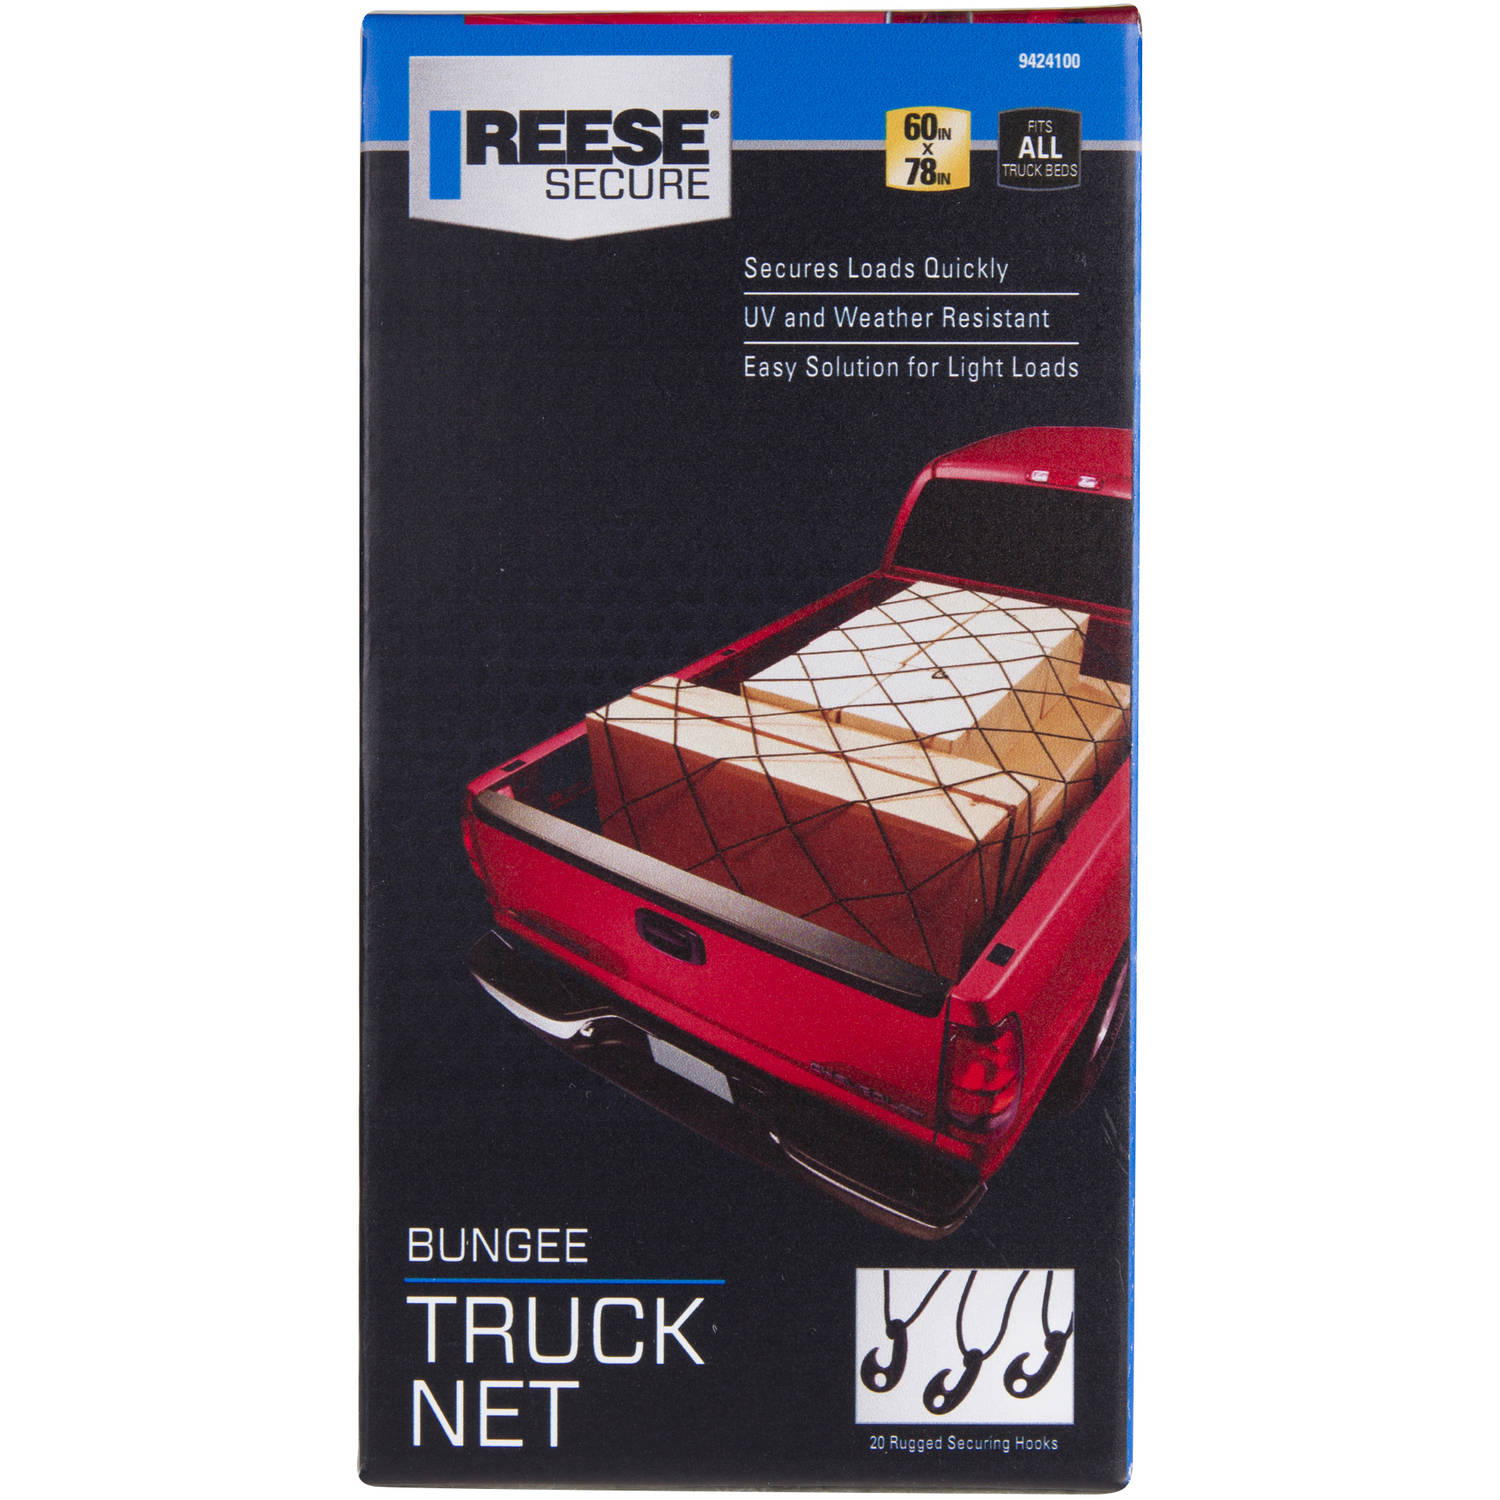 Reese Secure Carry Power Bungee Truck Net - image 4 of 4